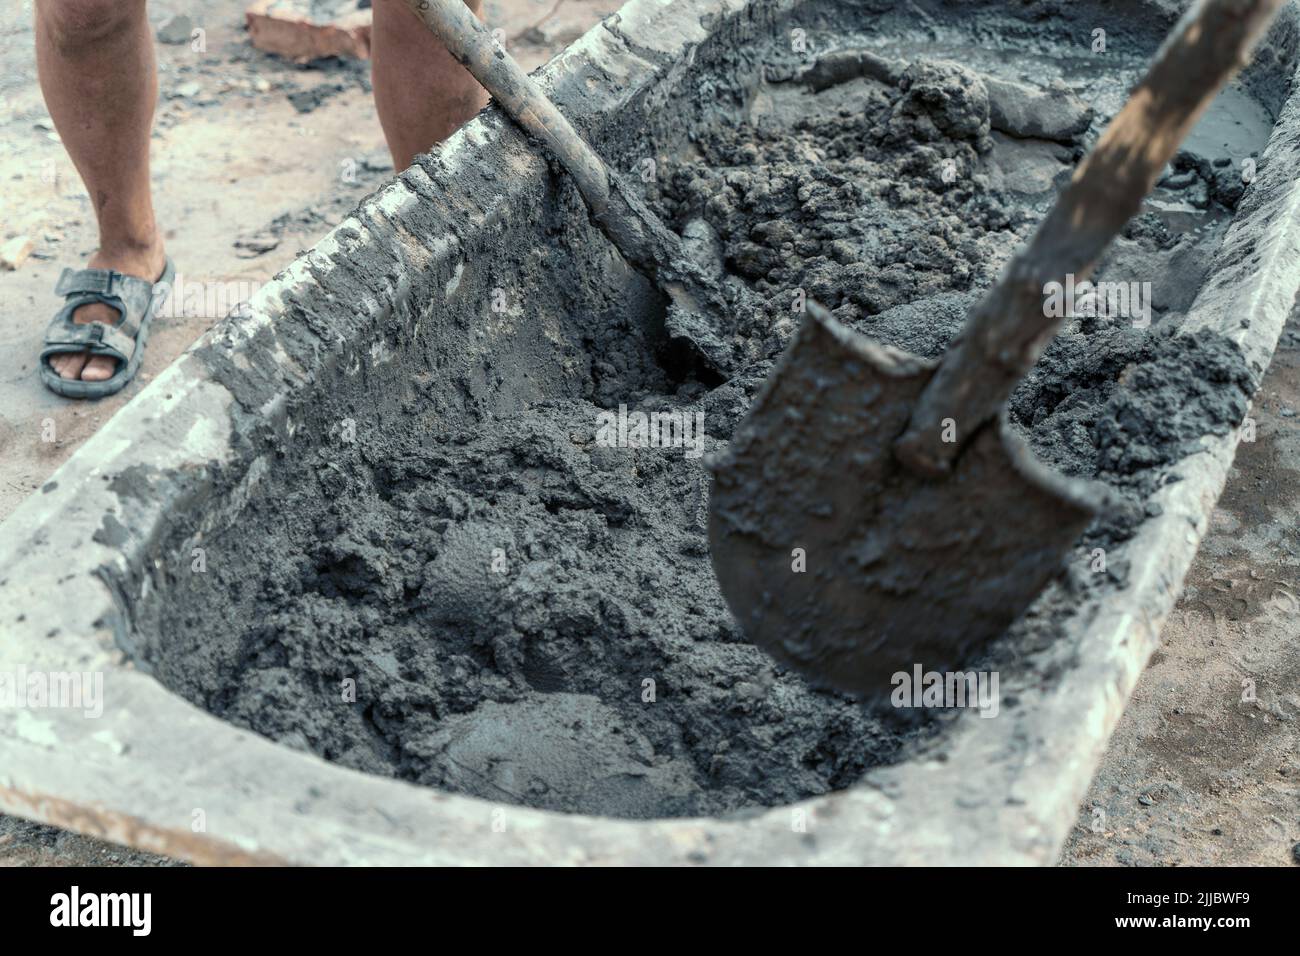 Workers stir or mix cement with shovels at construction site. Stock Photo